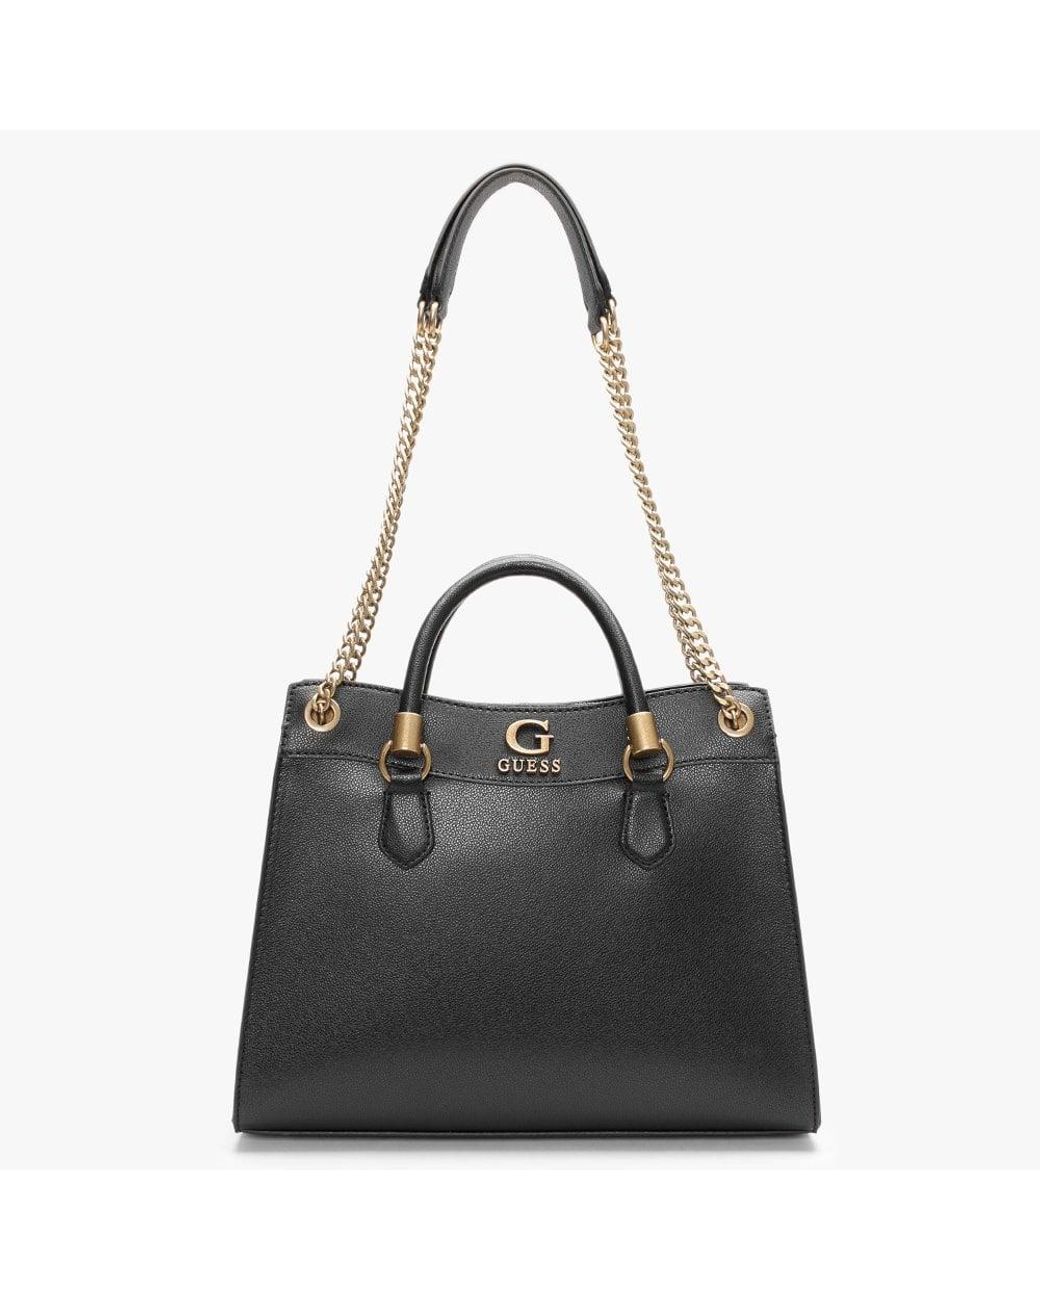 GUESS 'G' Logo Faux Leather Large Tote, Natural Brown